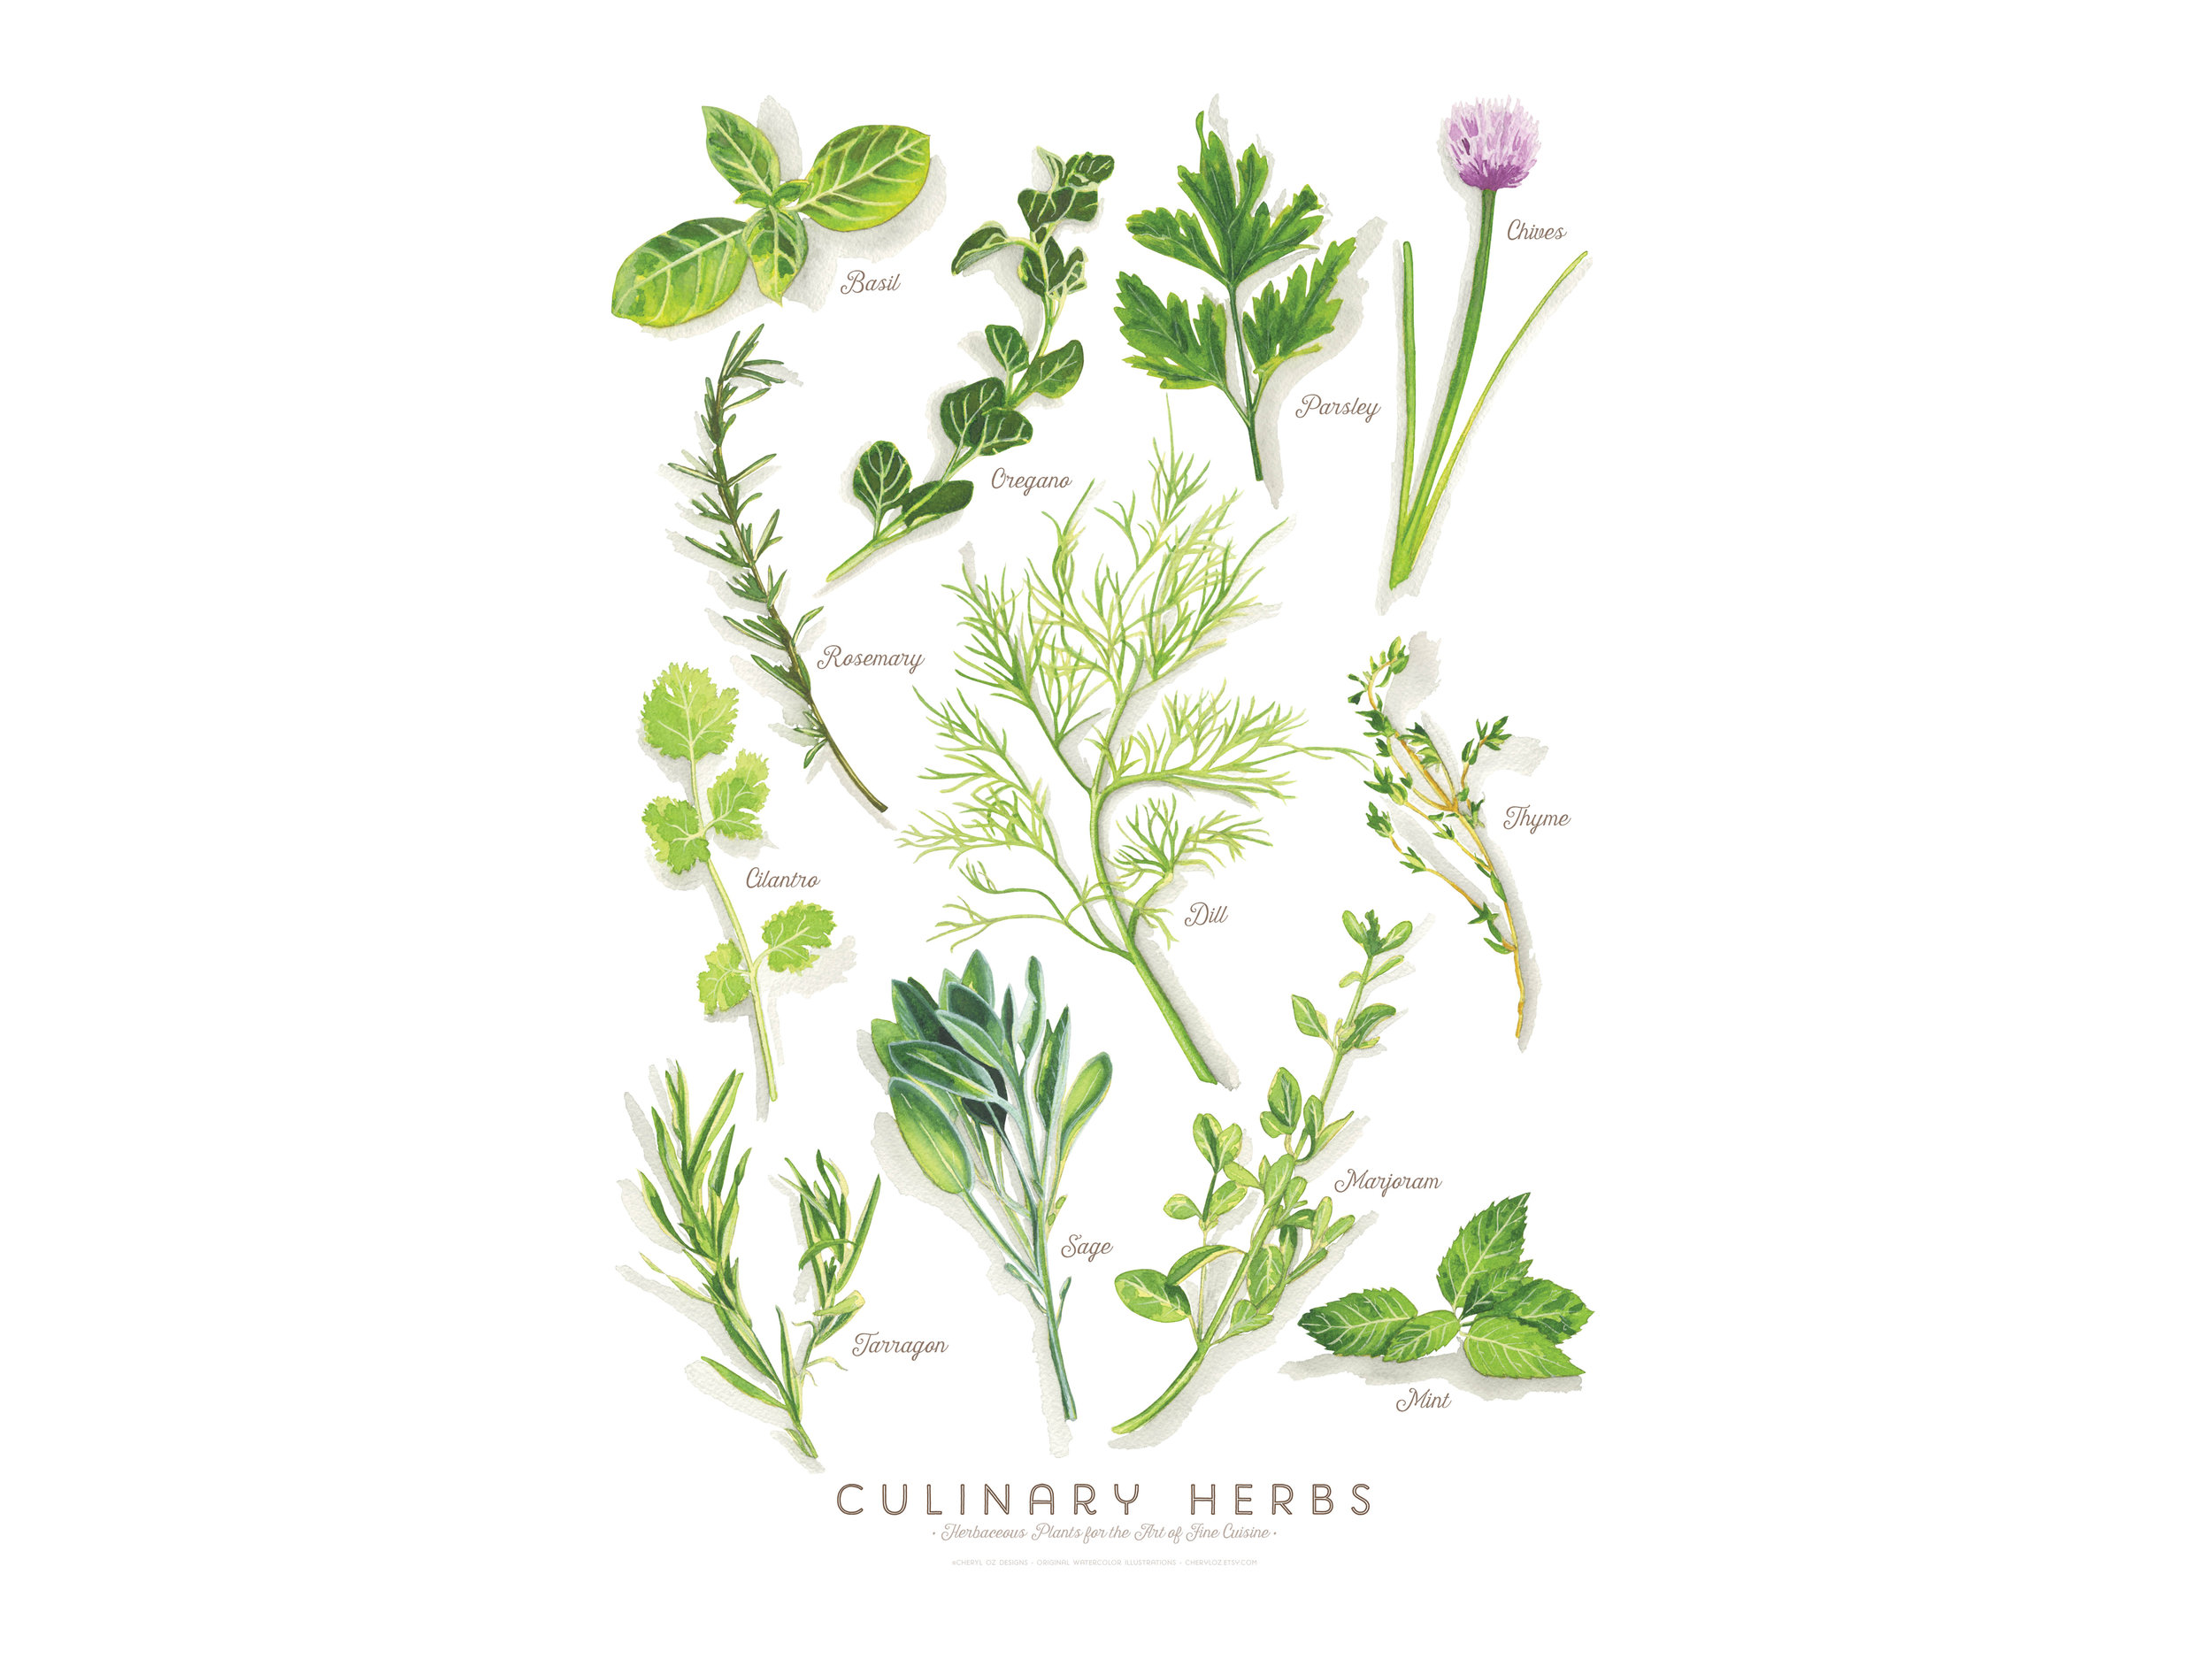 Culinary Herbs Poster/Print Design